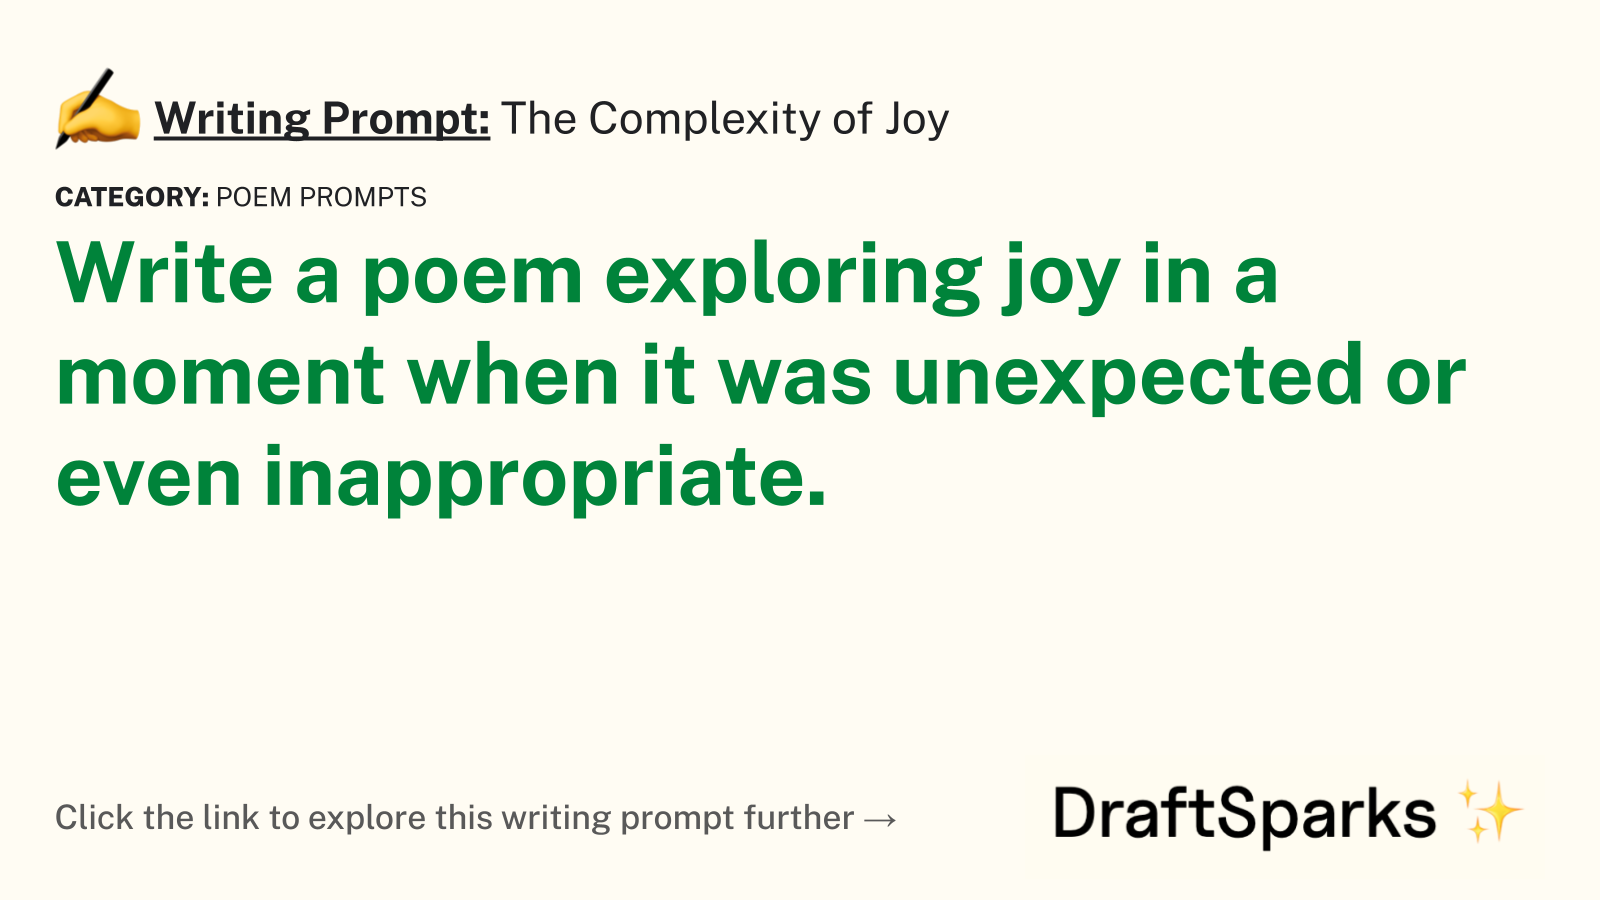 The Complexity of Joy